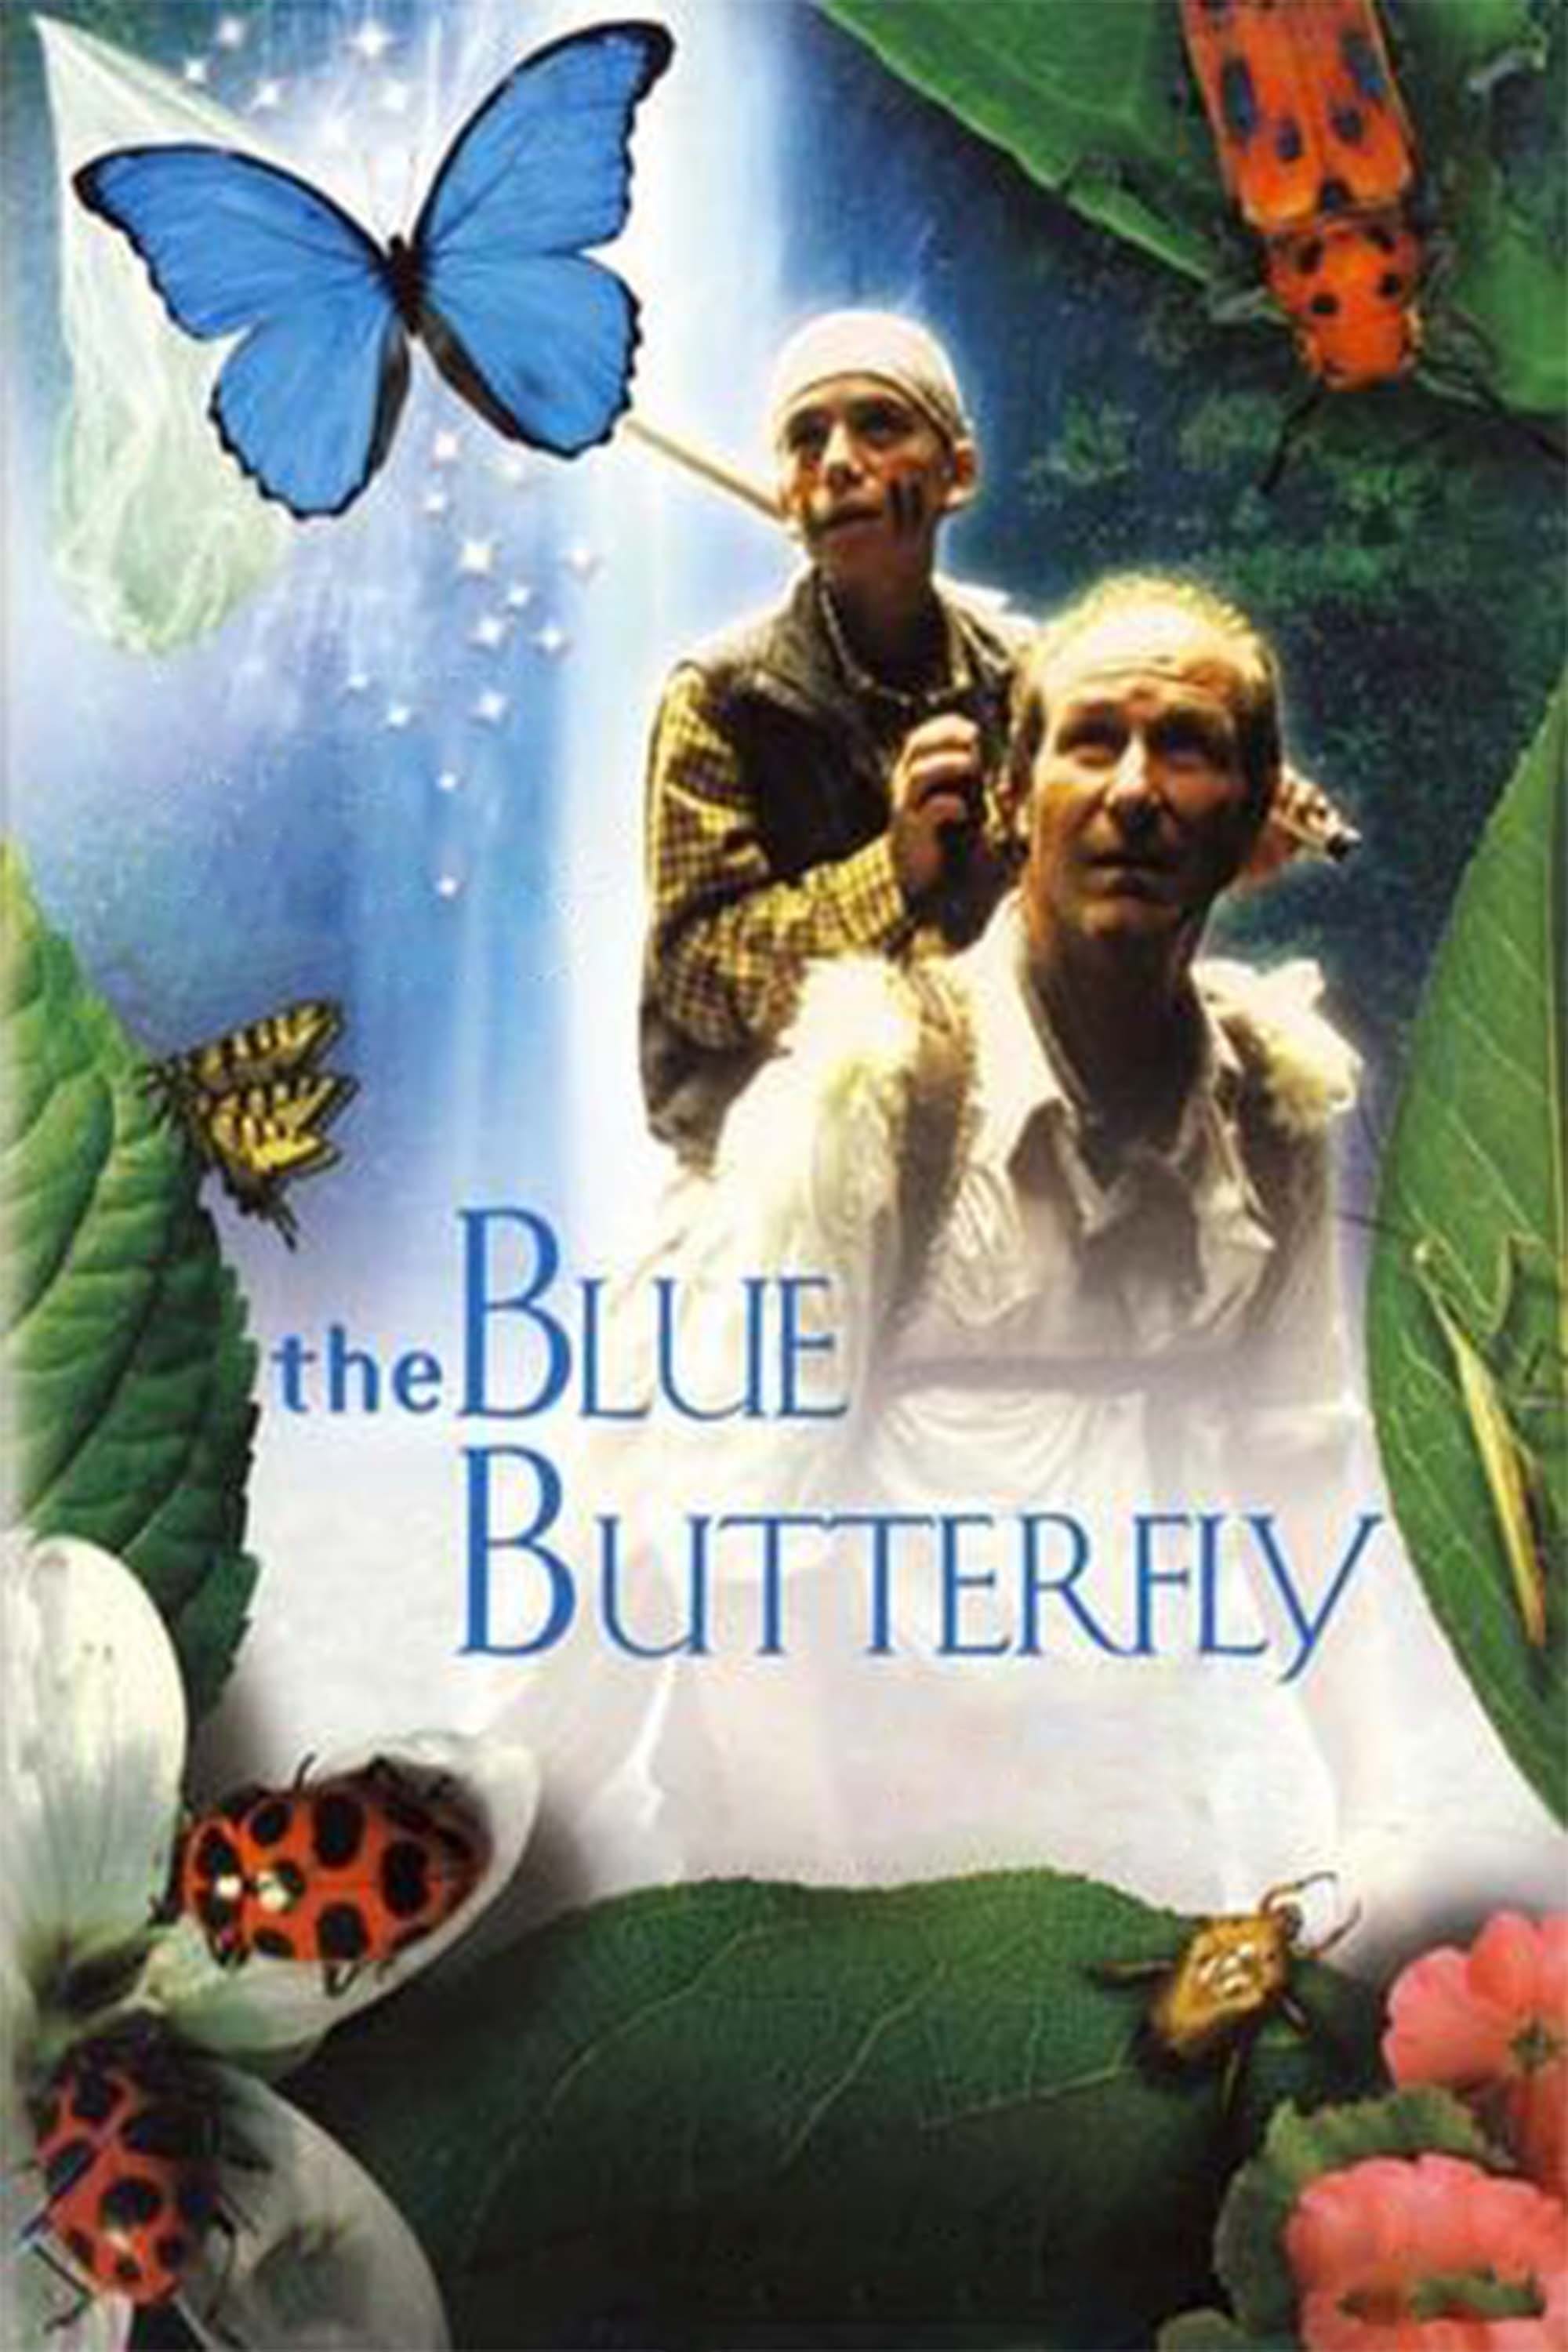 The Blue Butterfly (2004)